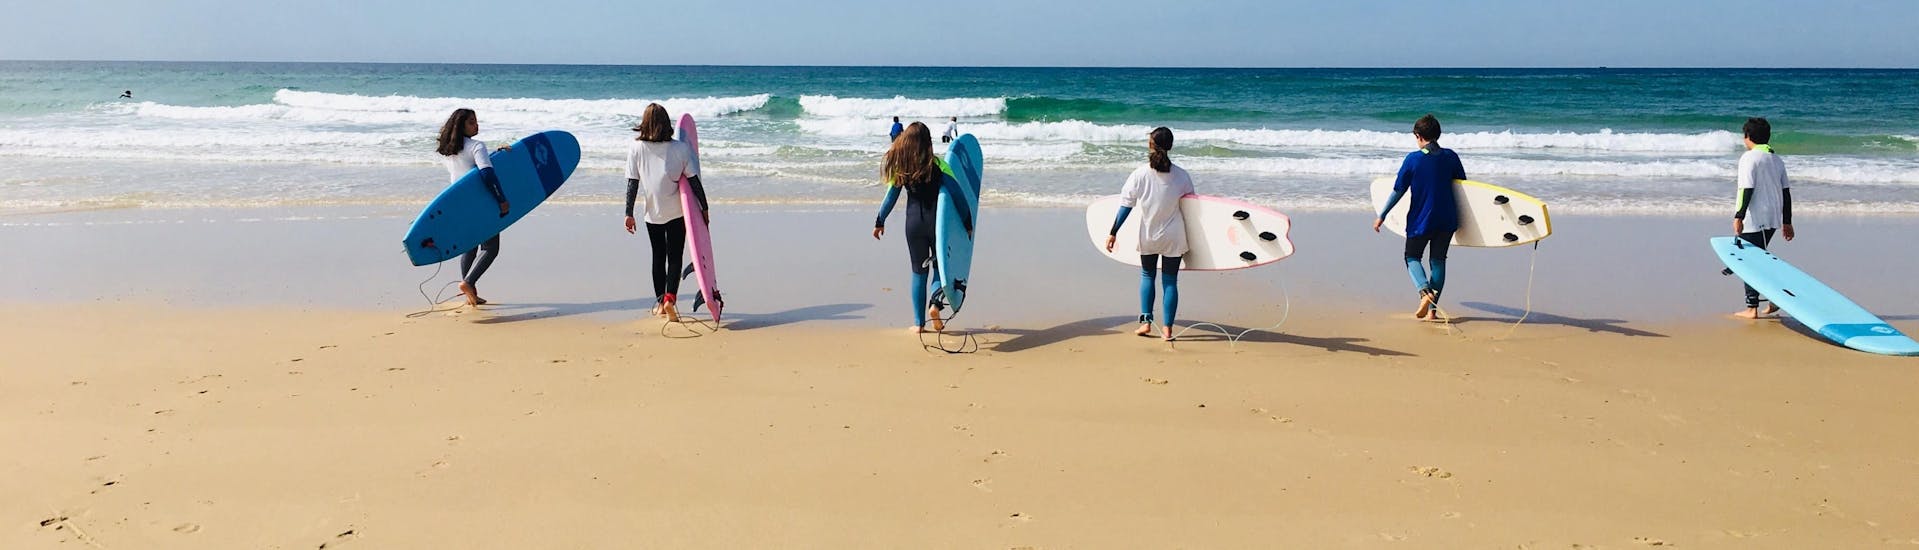 Some students are having their Private Surfing Lessons for All Levels from 8 years with It's On Surf School.